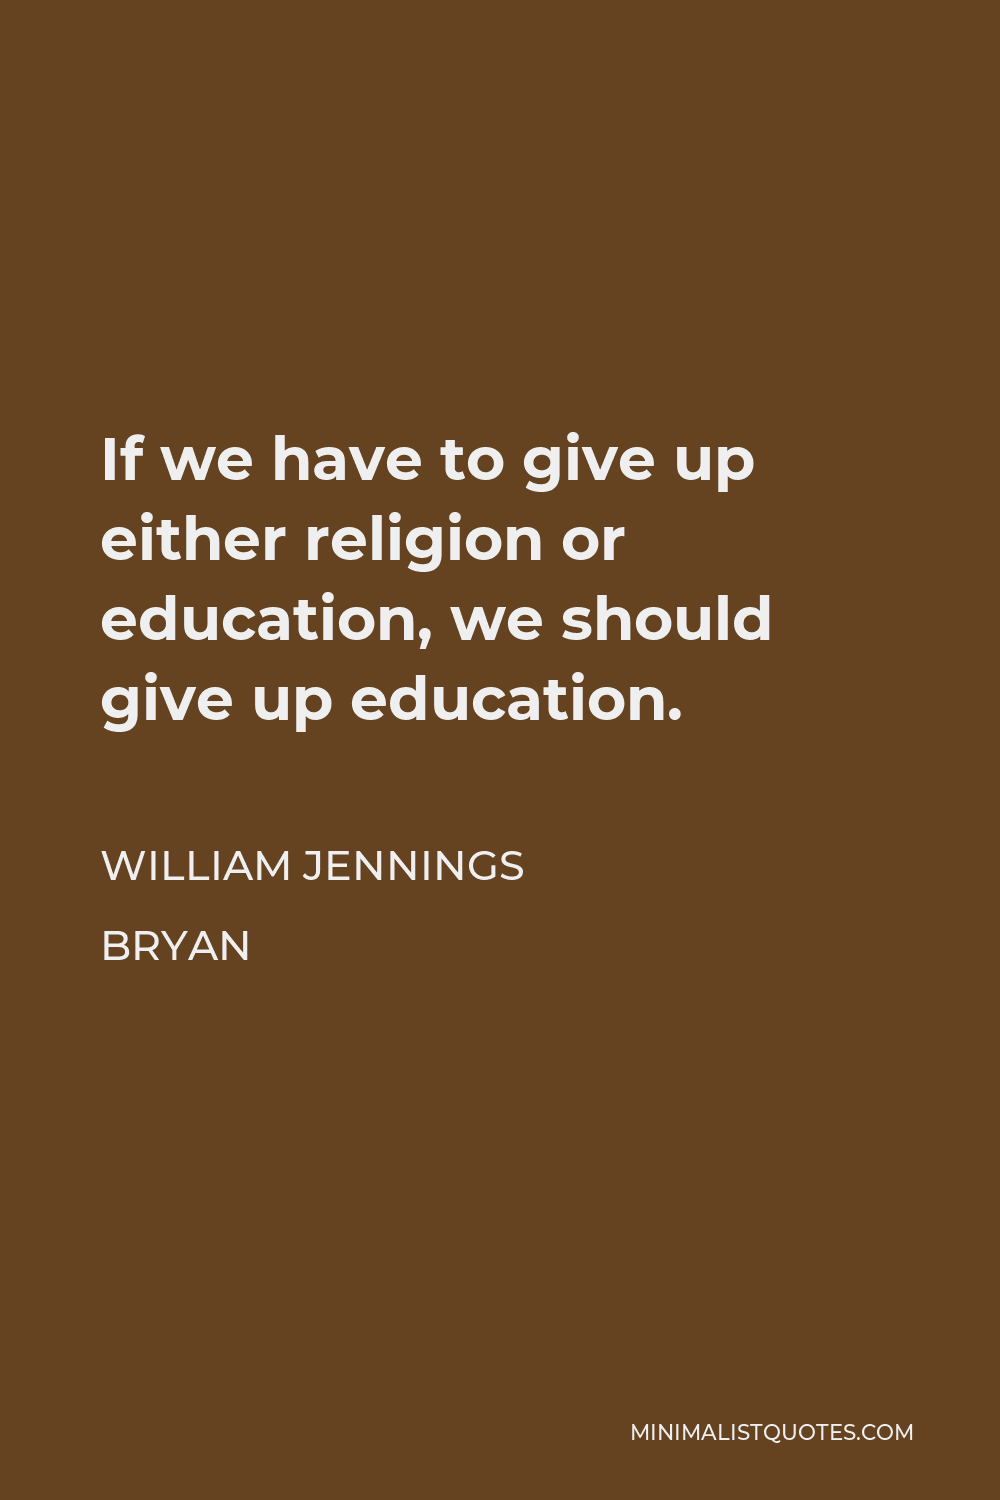 William Jennings Bryan Quote - If we have to give up either religion or education, we should give up education.